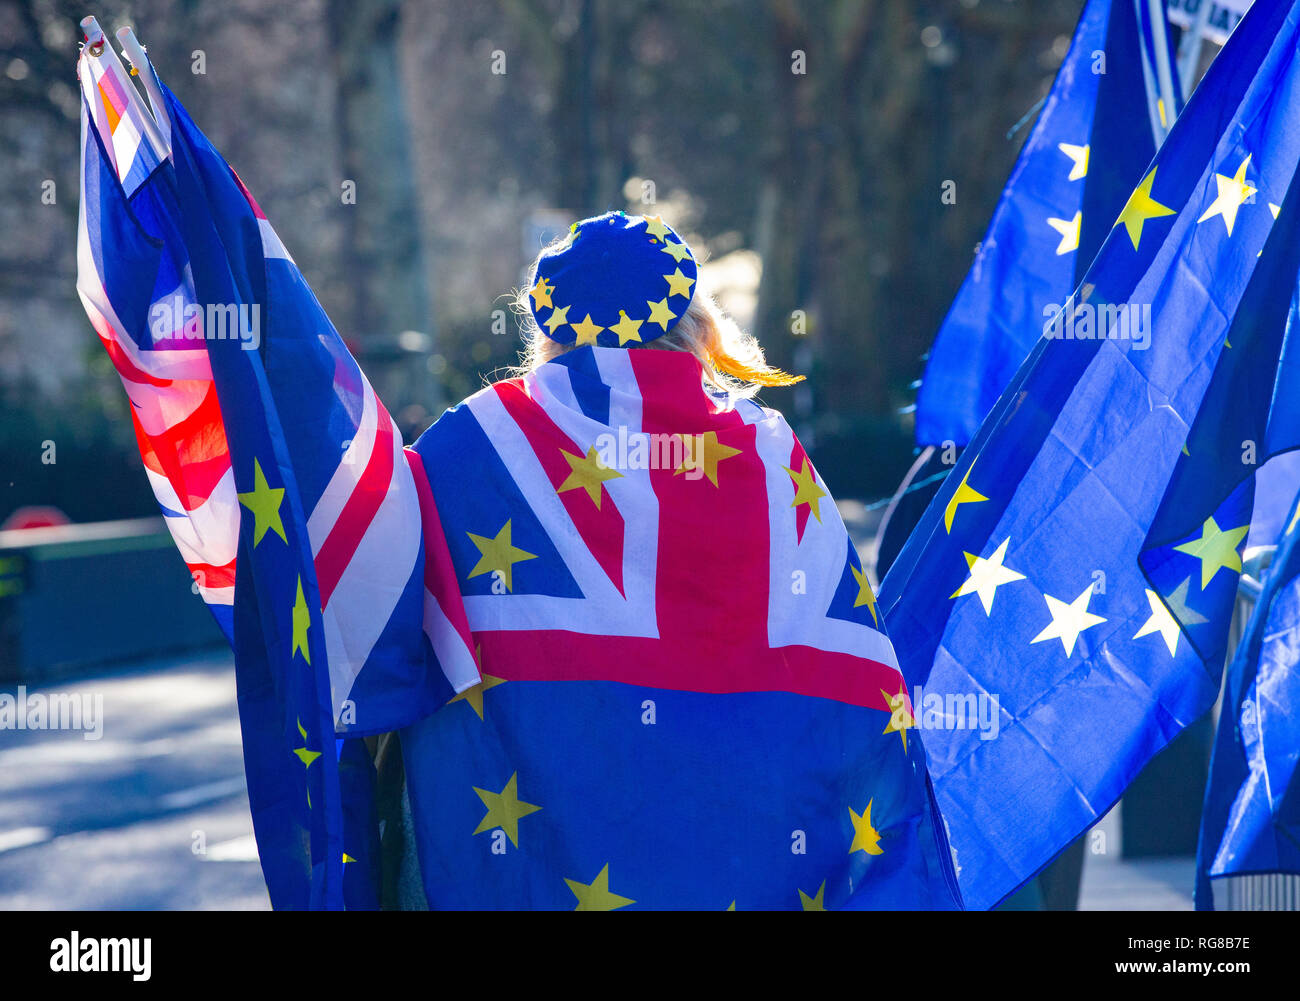 London, UK. 28th Jan, 2019. Pro European supporter with Union flags on College Green in Westminster one day before another crucial Brexit vote. The UK Parliament will debate and vote on a 'Plan B' Brexit plan from Theresa May's government on 29 January, it was announced on Thursday. May suffered one of the biggest defeats in British political history earlier this week, when her withdrawal agreement - negotiated for two years with the EU - was defeated by 230 votes Credit: Tommy London/Alamy Live News Stock Photo